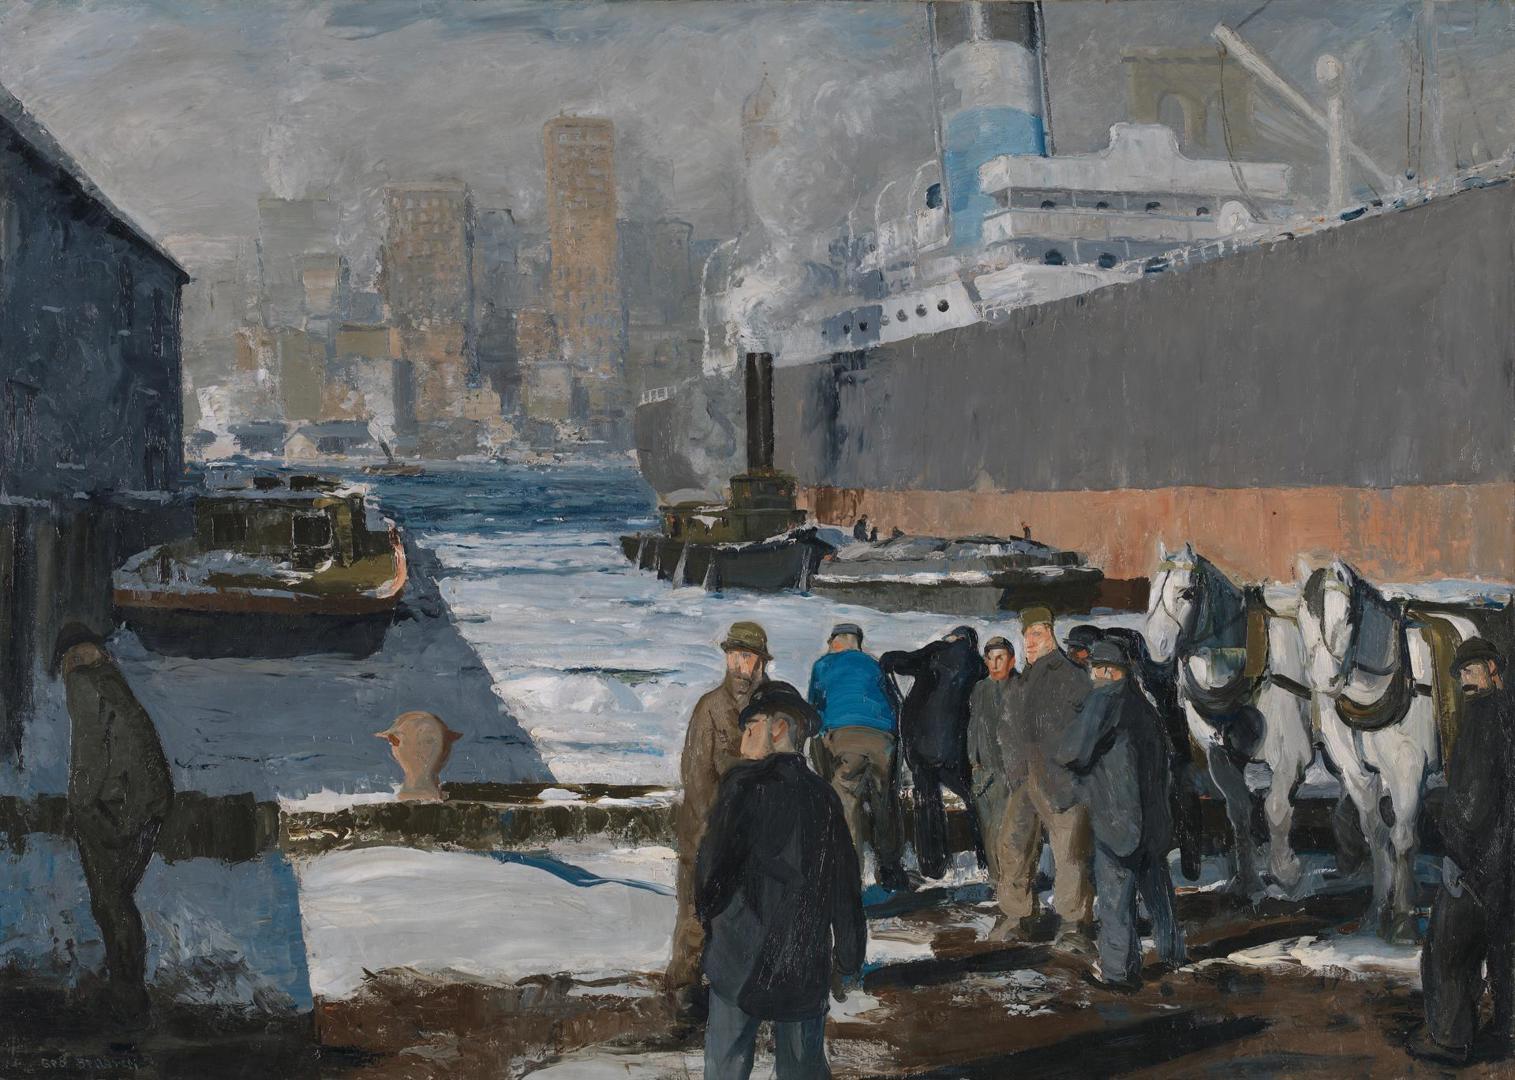 Men of the Docks by George Bellows